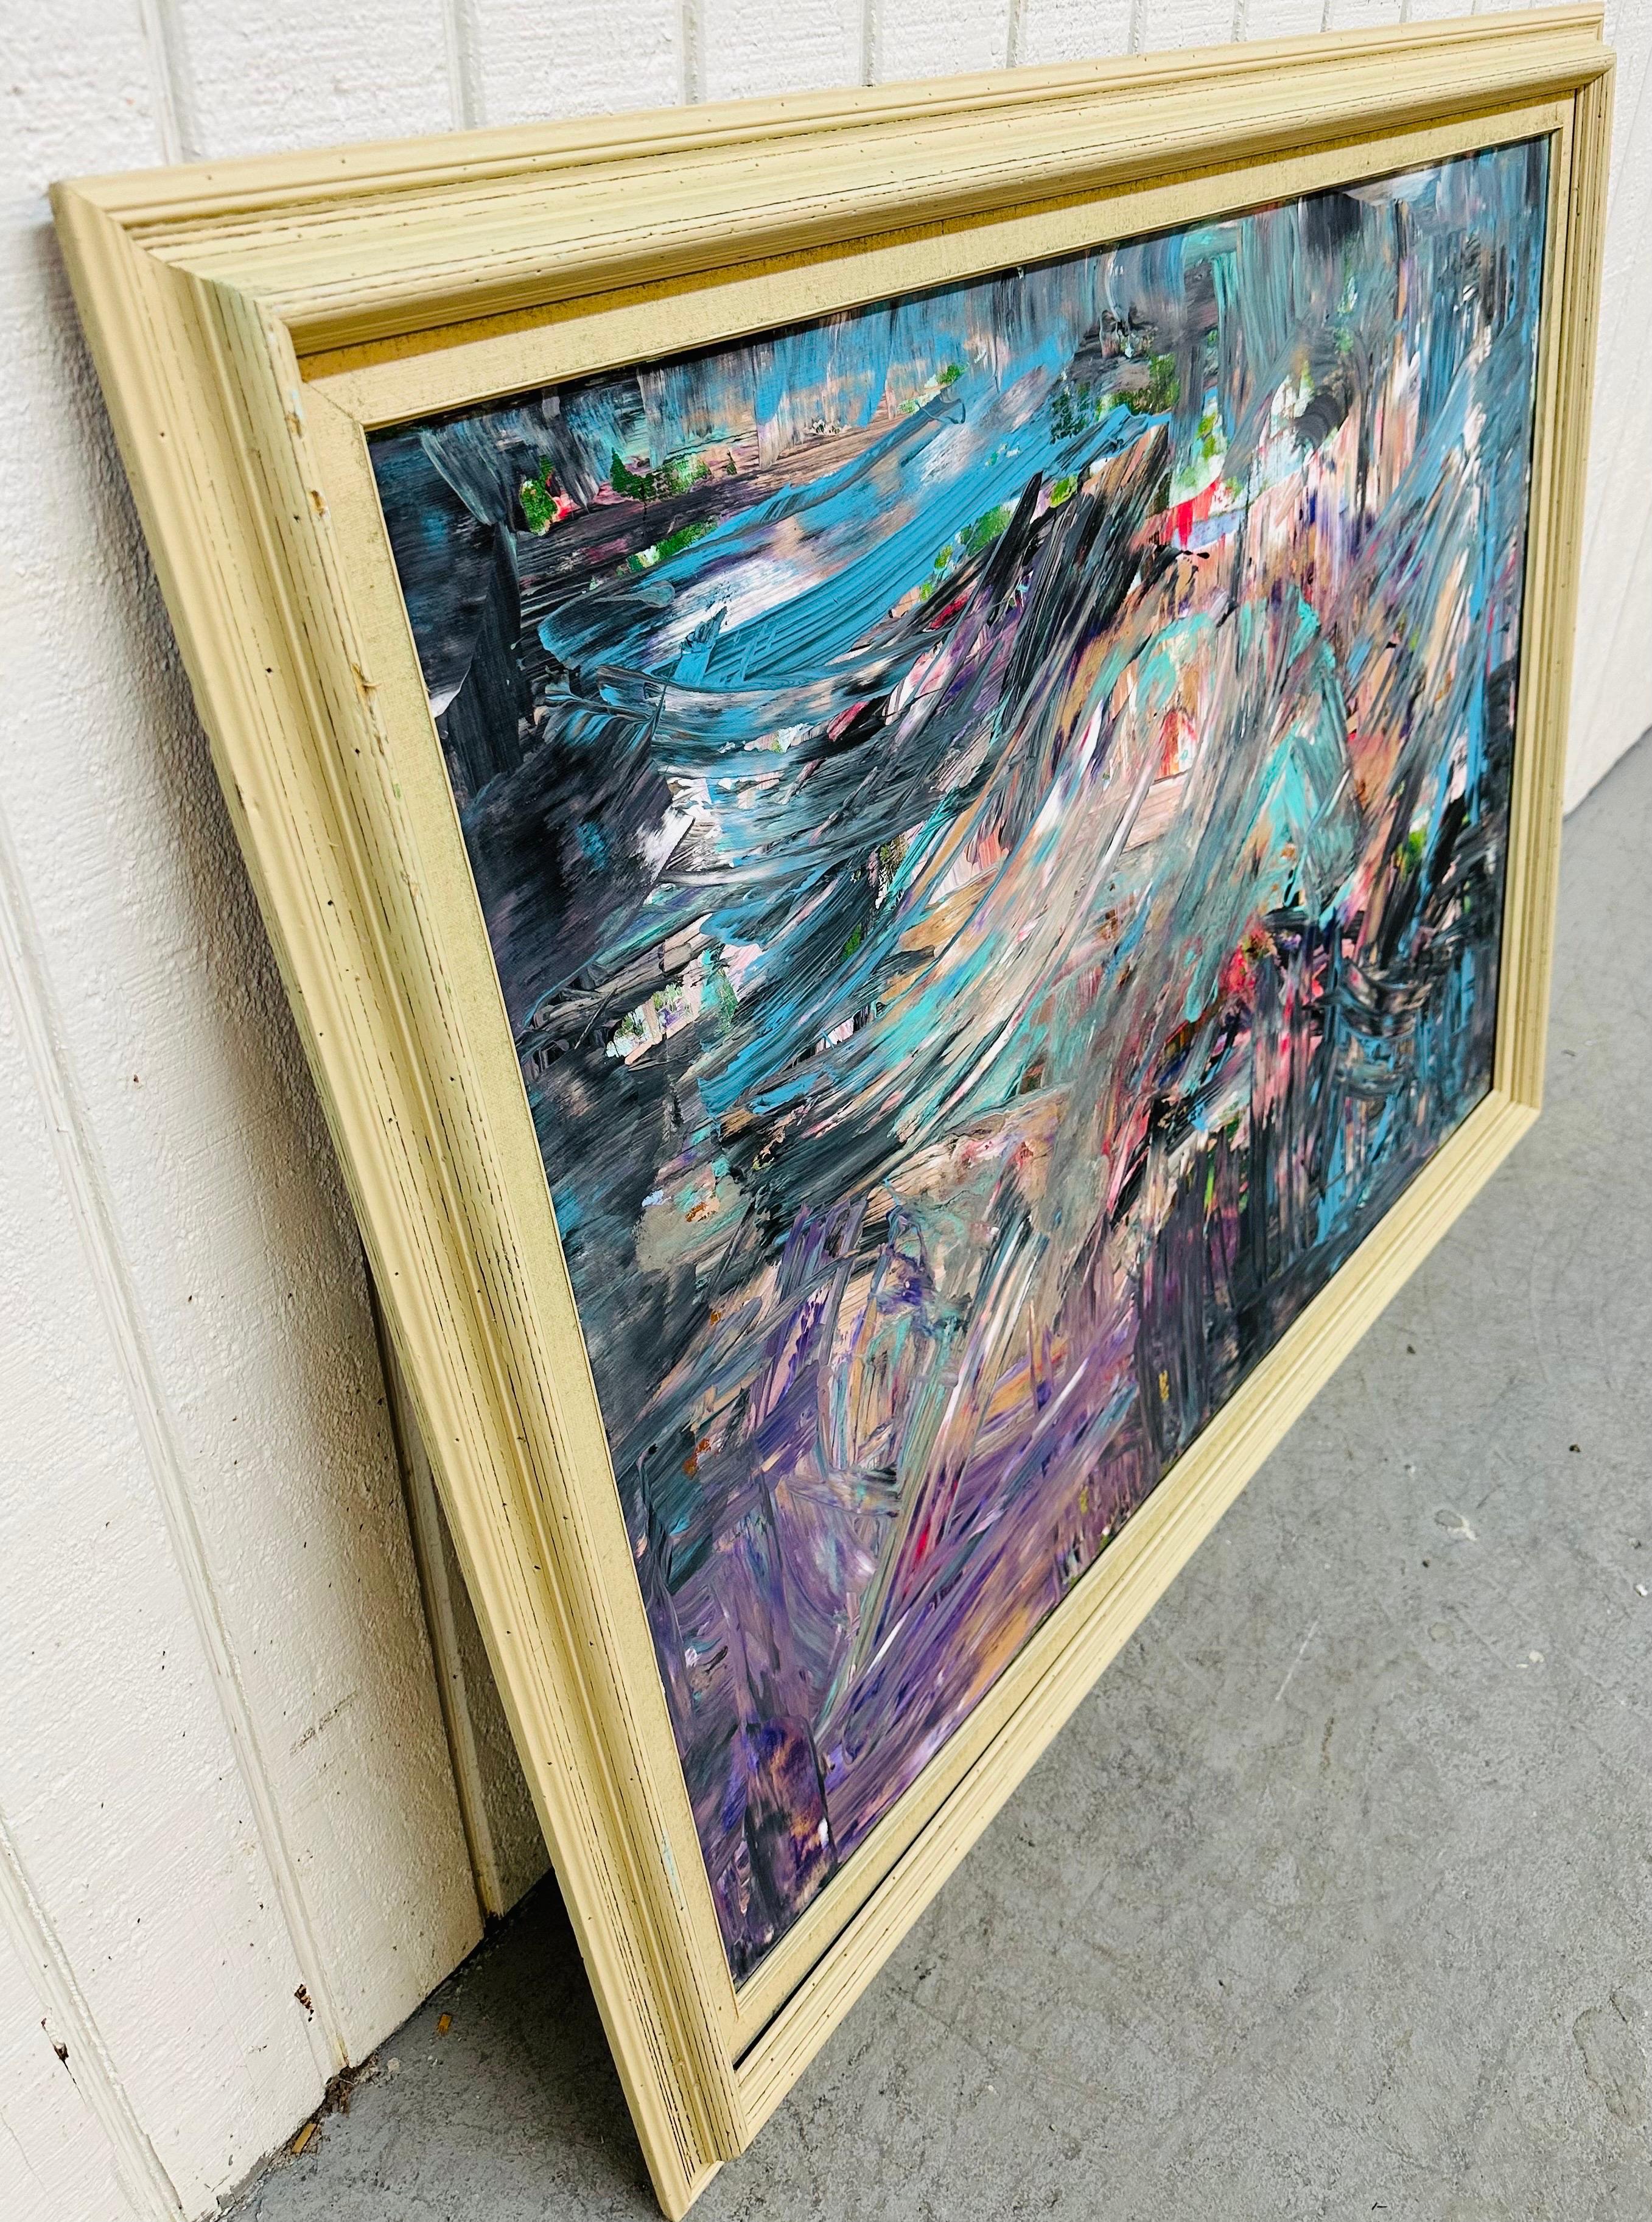 This listing is for a Modern Expressionist Abstract Painting. Featuring a wood frame, original expressionist style abstract art, and a mixture of deep colors. This is an exceptional piece by artist Mullin.